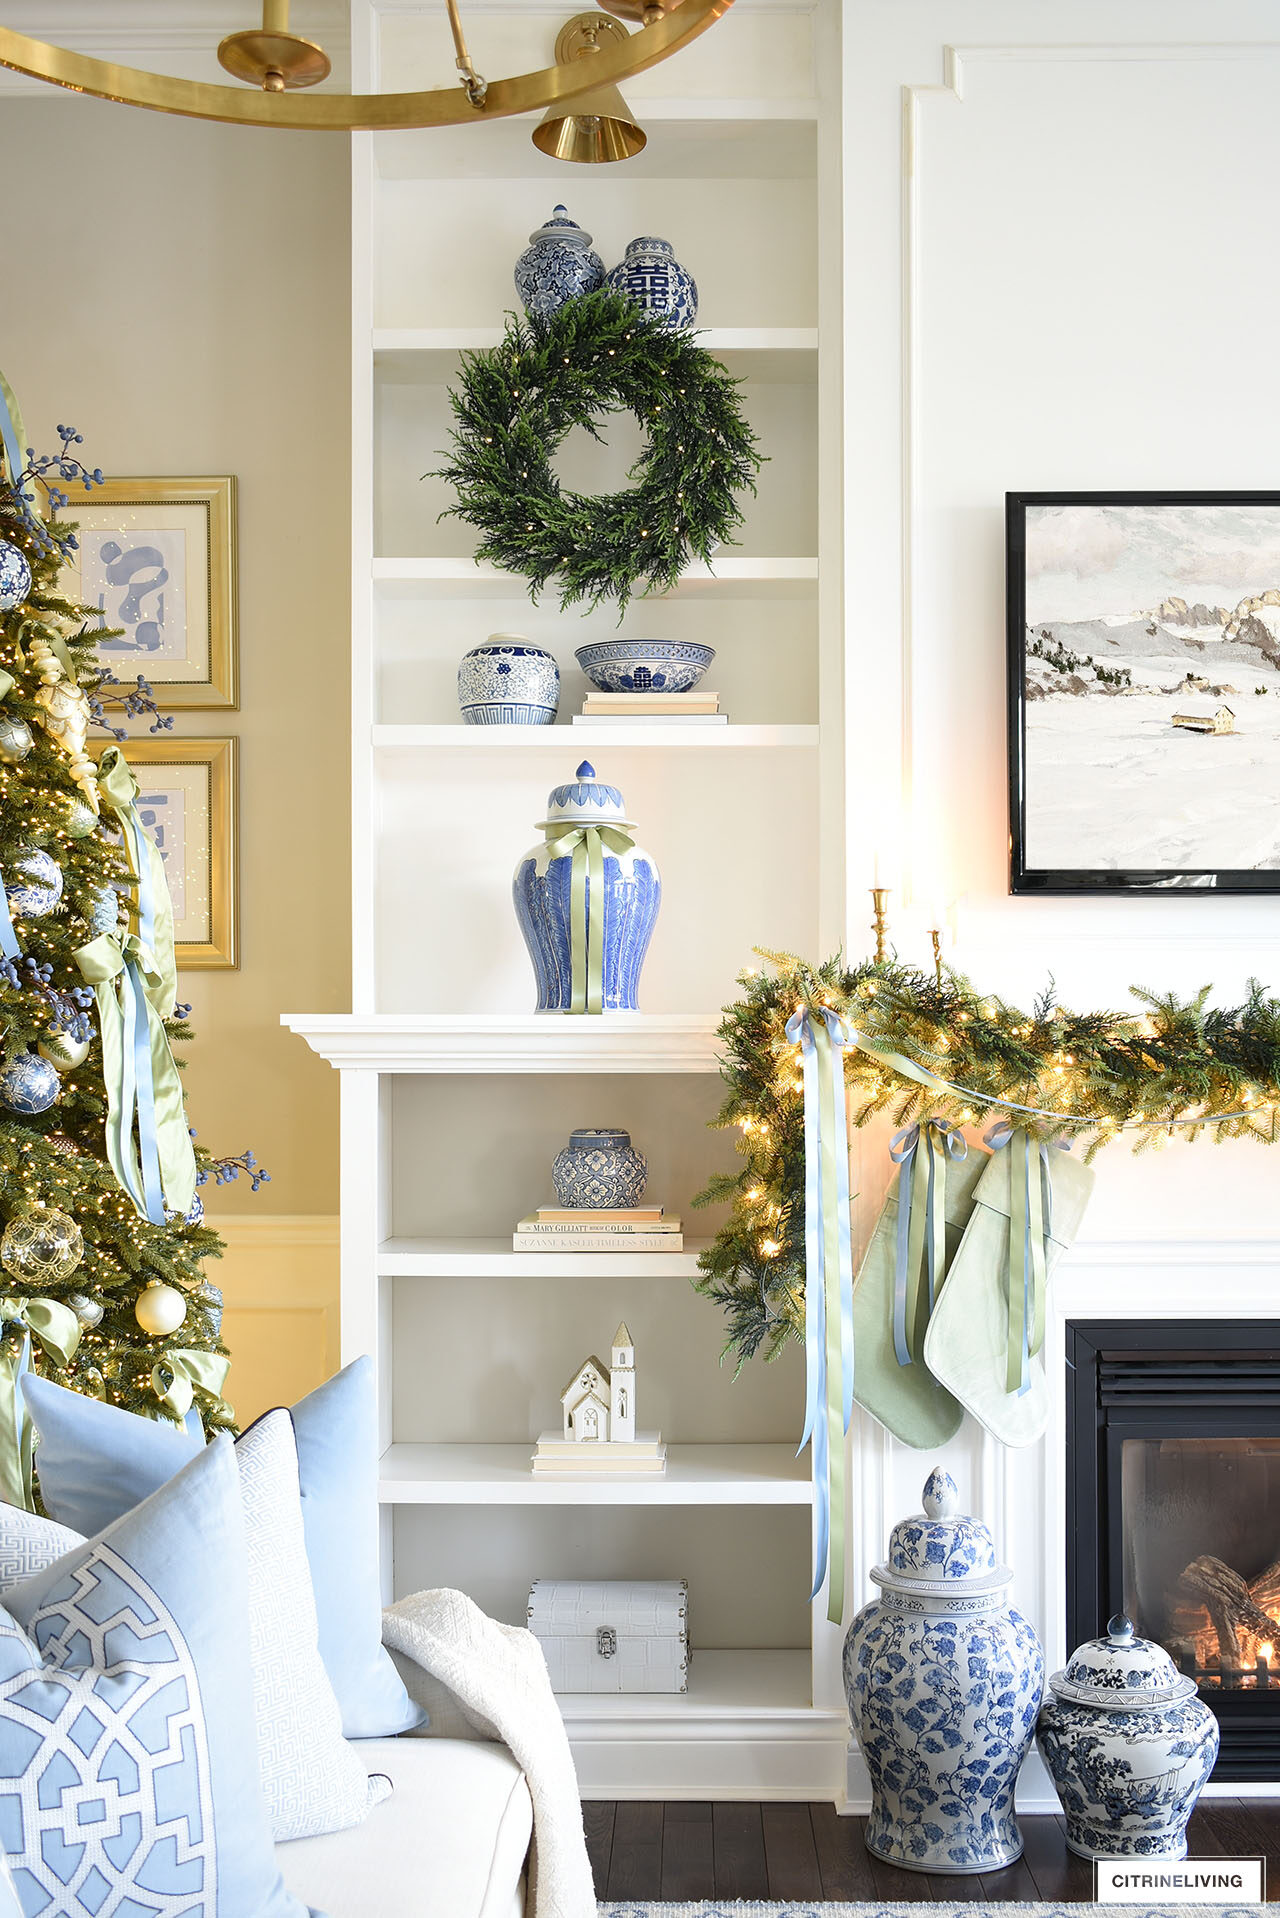 GORGEOUS BLUE AND GOLD CHRISTMAS LIVING ROOM - CITRINELIVING